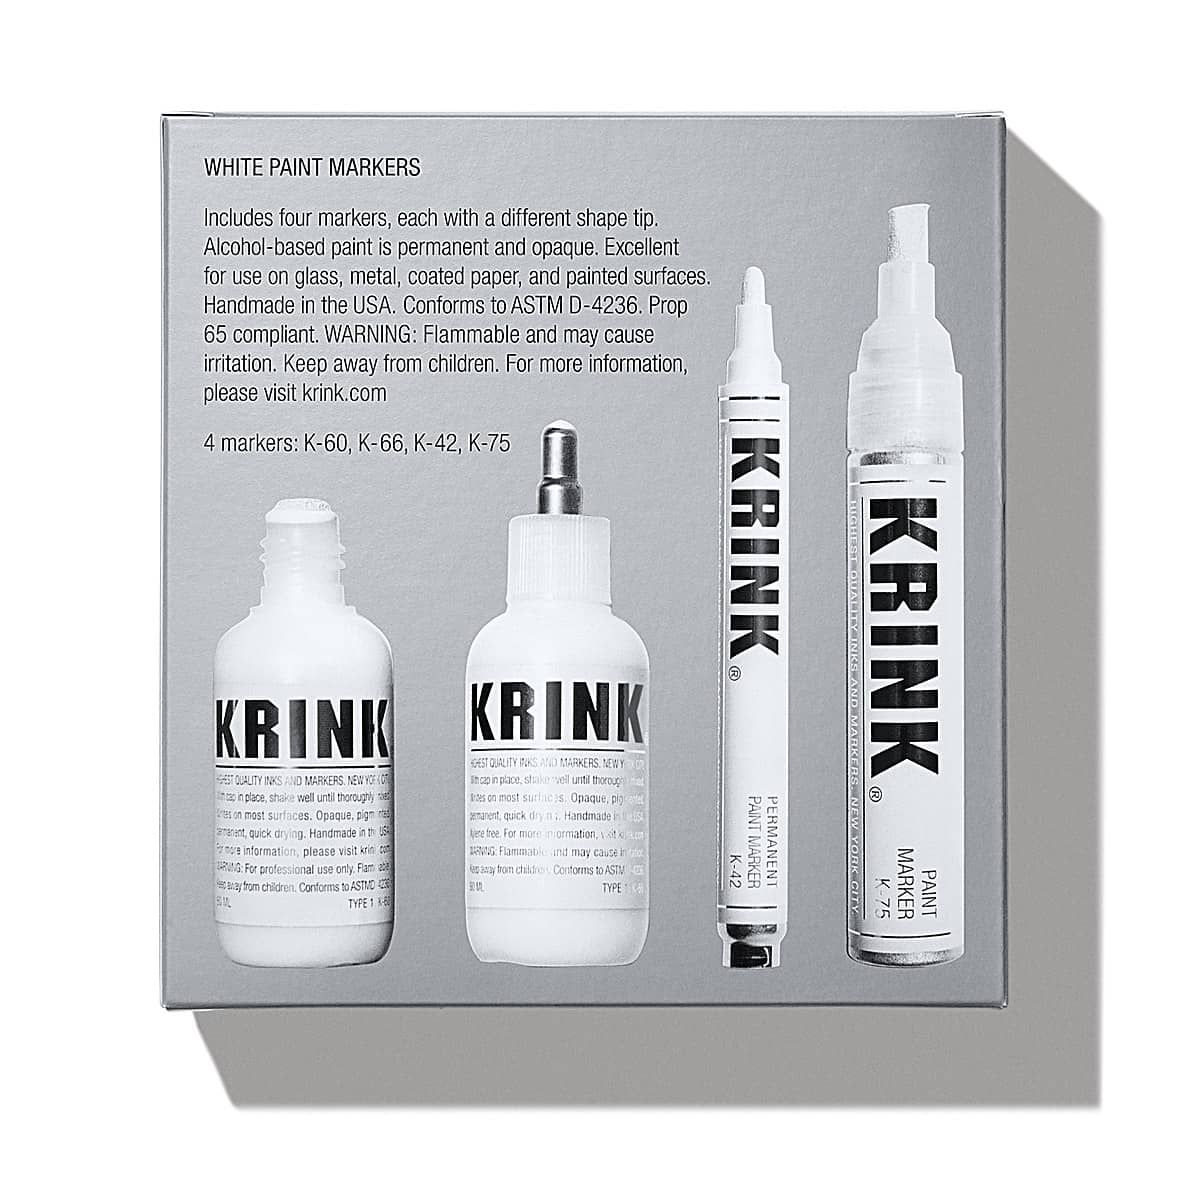 Krink K-42 White Paint Marker - Vibrant and Opaque Fine Art Paint Pen for  Any Surface - Permanent Marker with Alcohol-Based Paint for Metal Glass